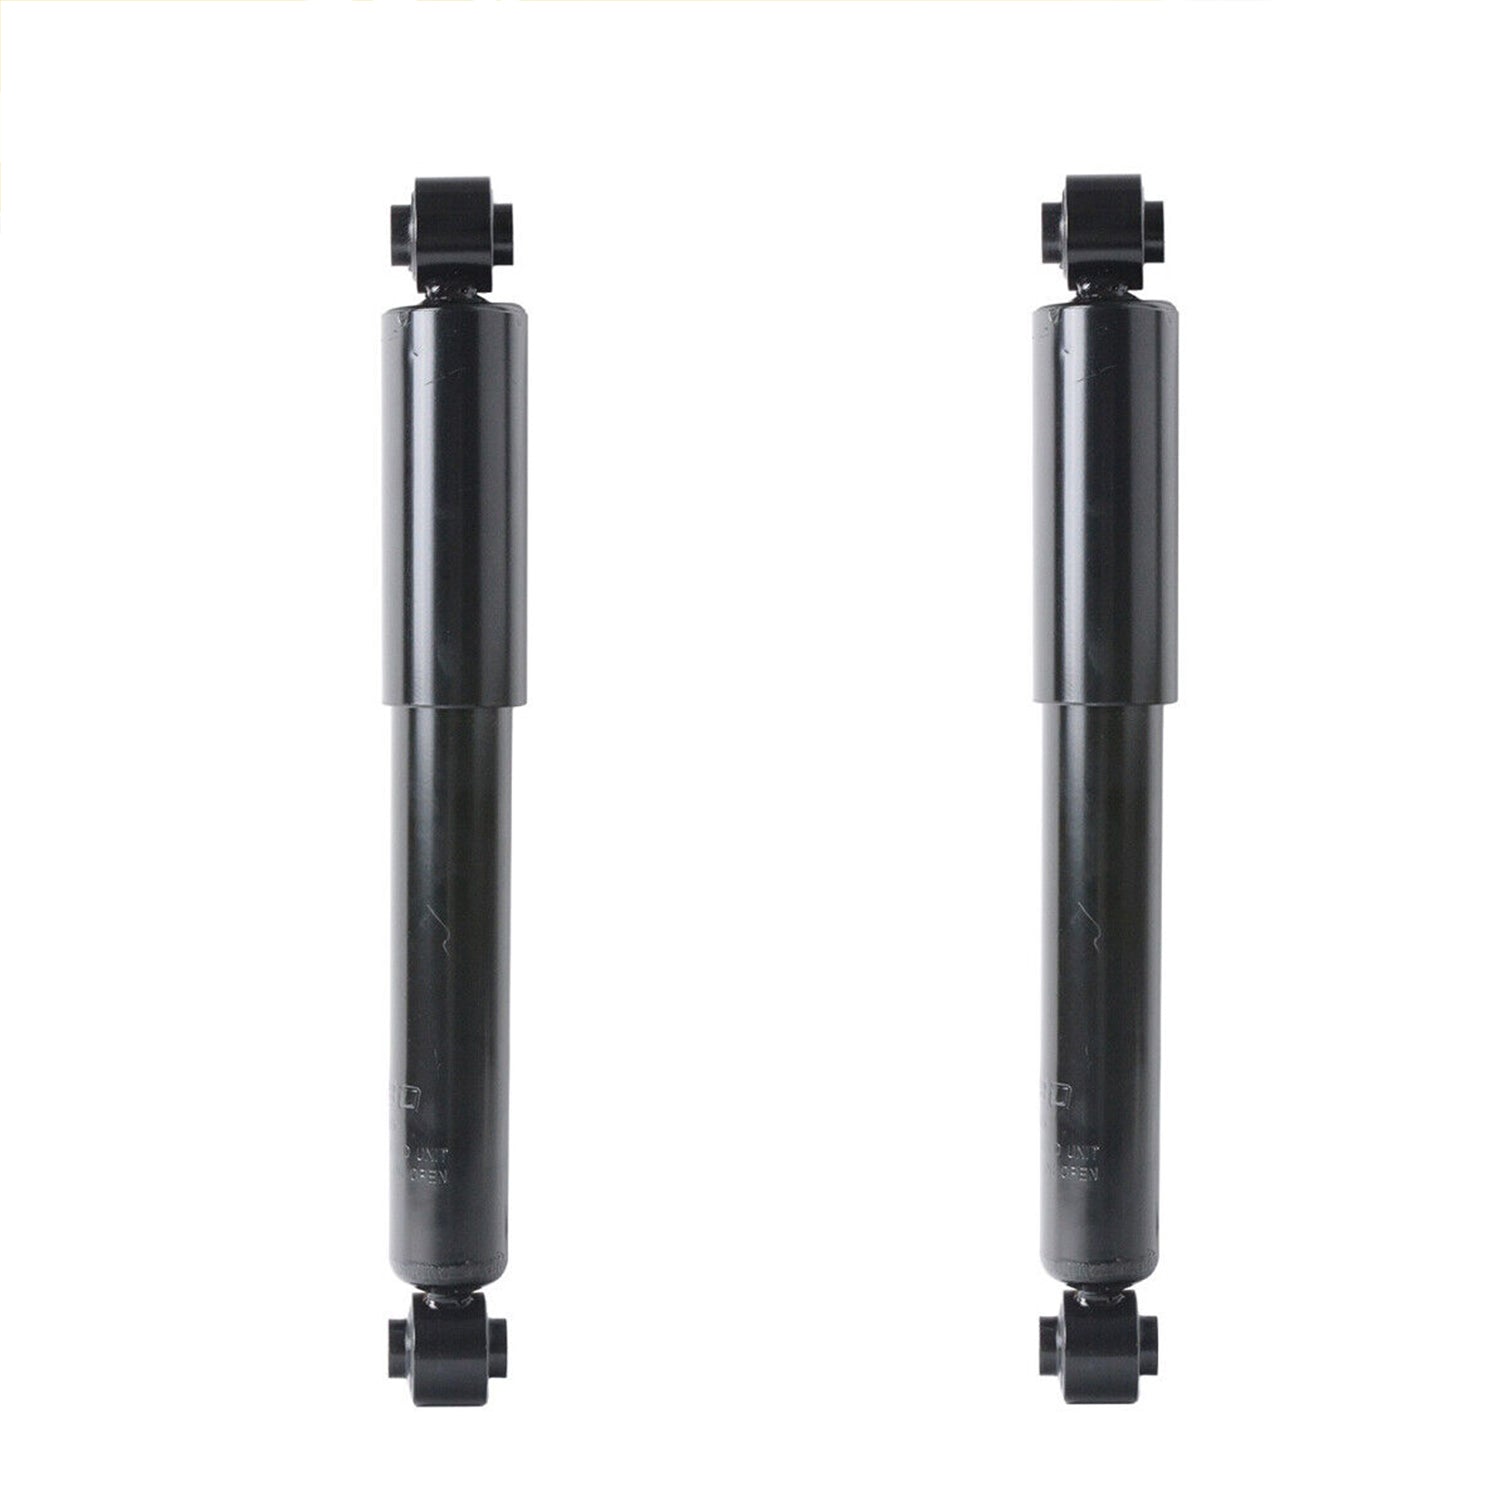 (Out of Stock) Pair Rear Shock Absorbers for Toyota Rav4 2006 2007 2008 2009 2010 - 2018